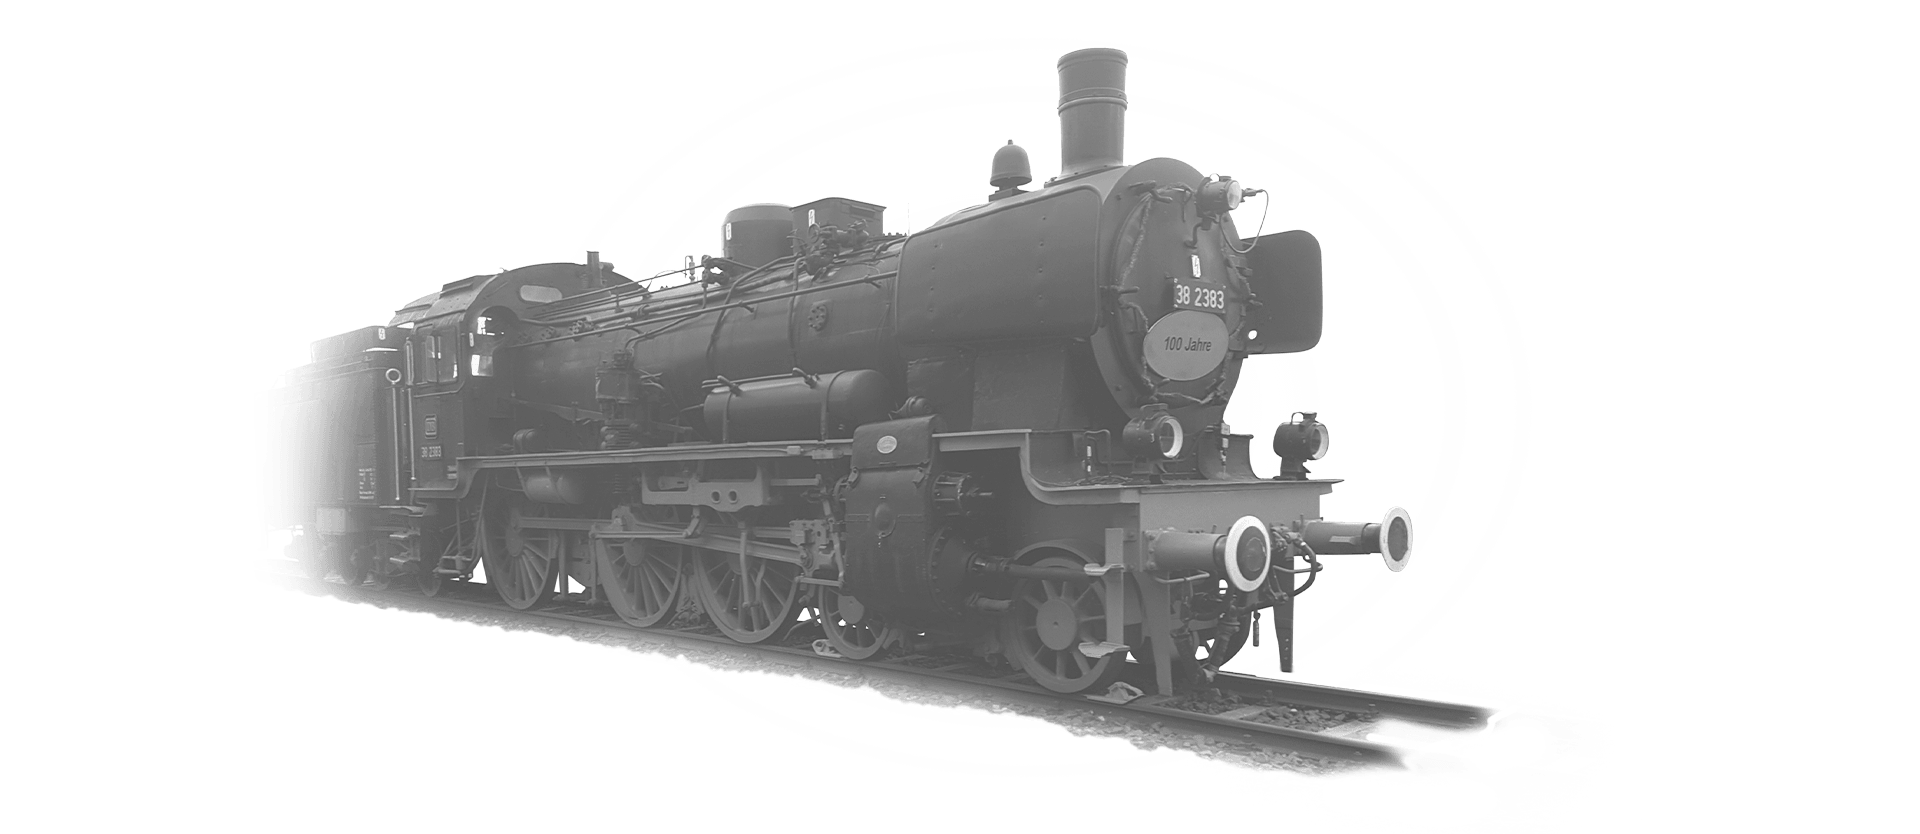 The locomotive 38-2383 is coming towards the camera in black and white